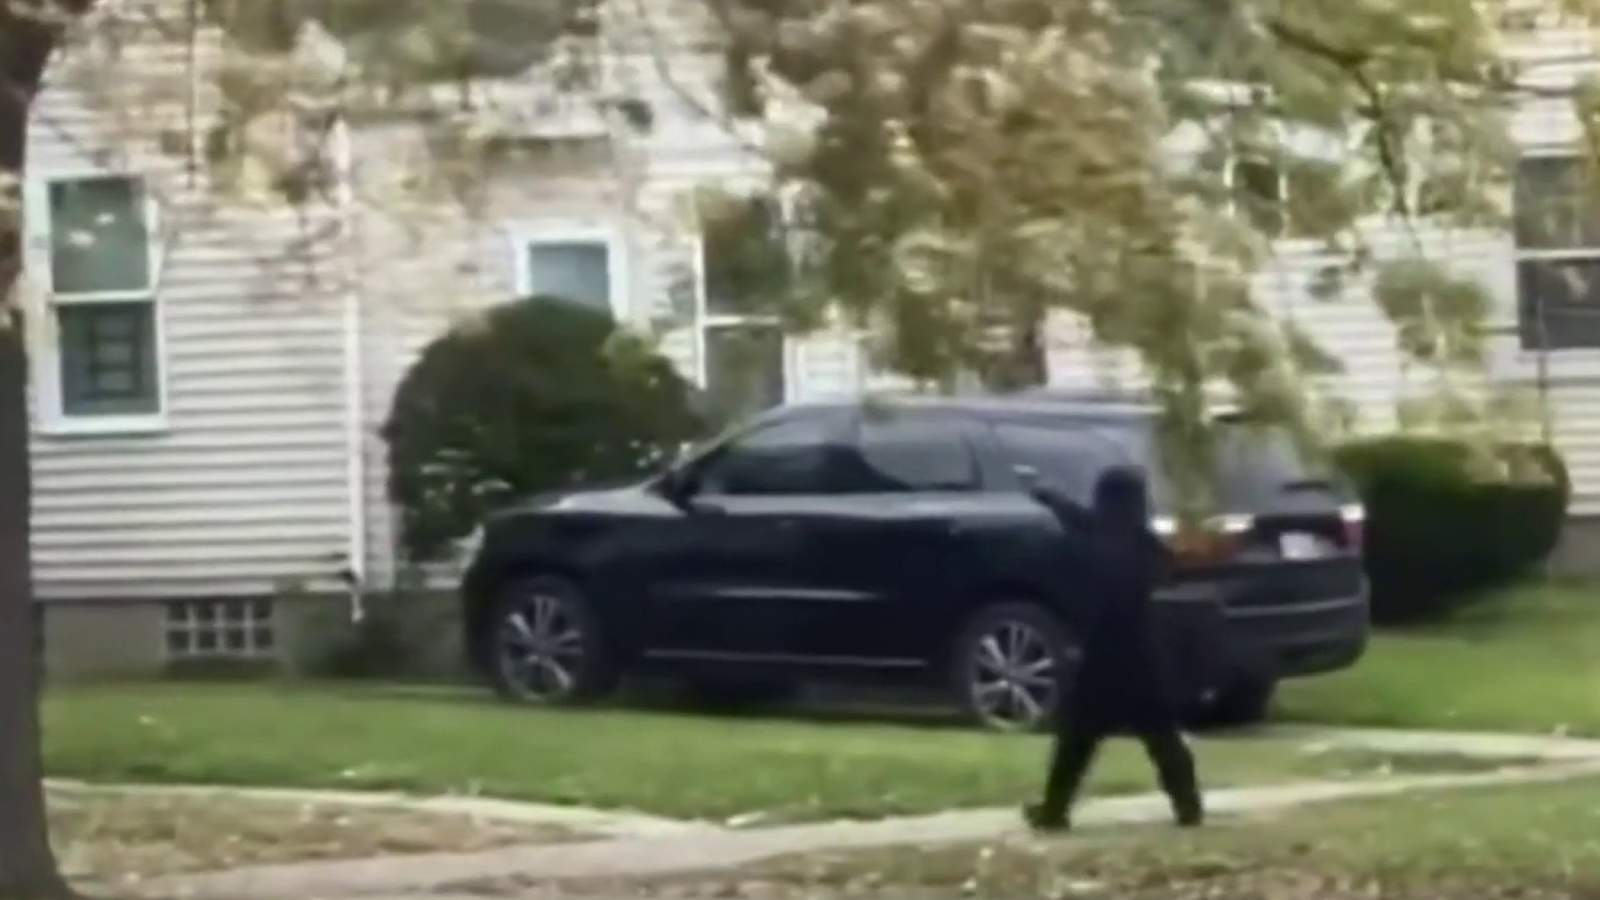 Neighbor records video of man firing shots into Detroit home after domestic dispute